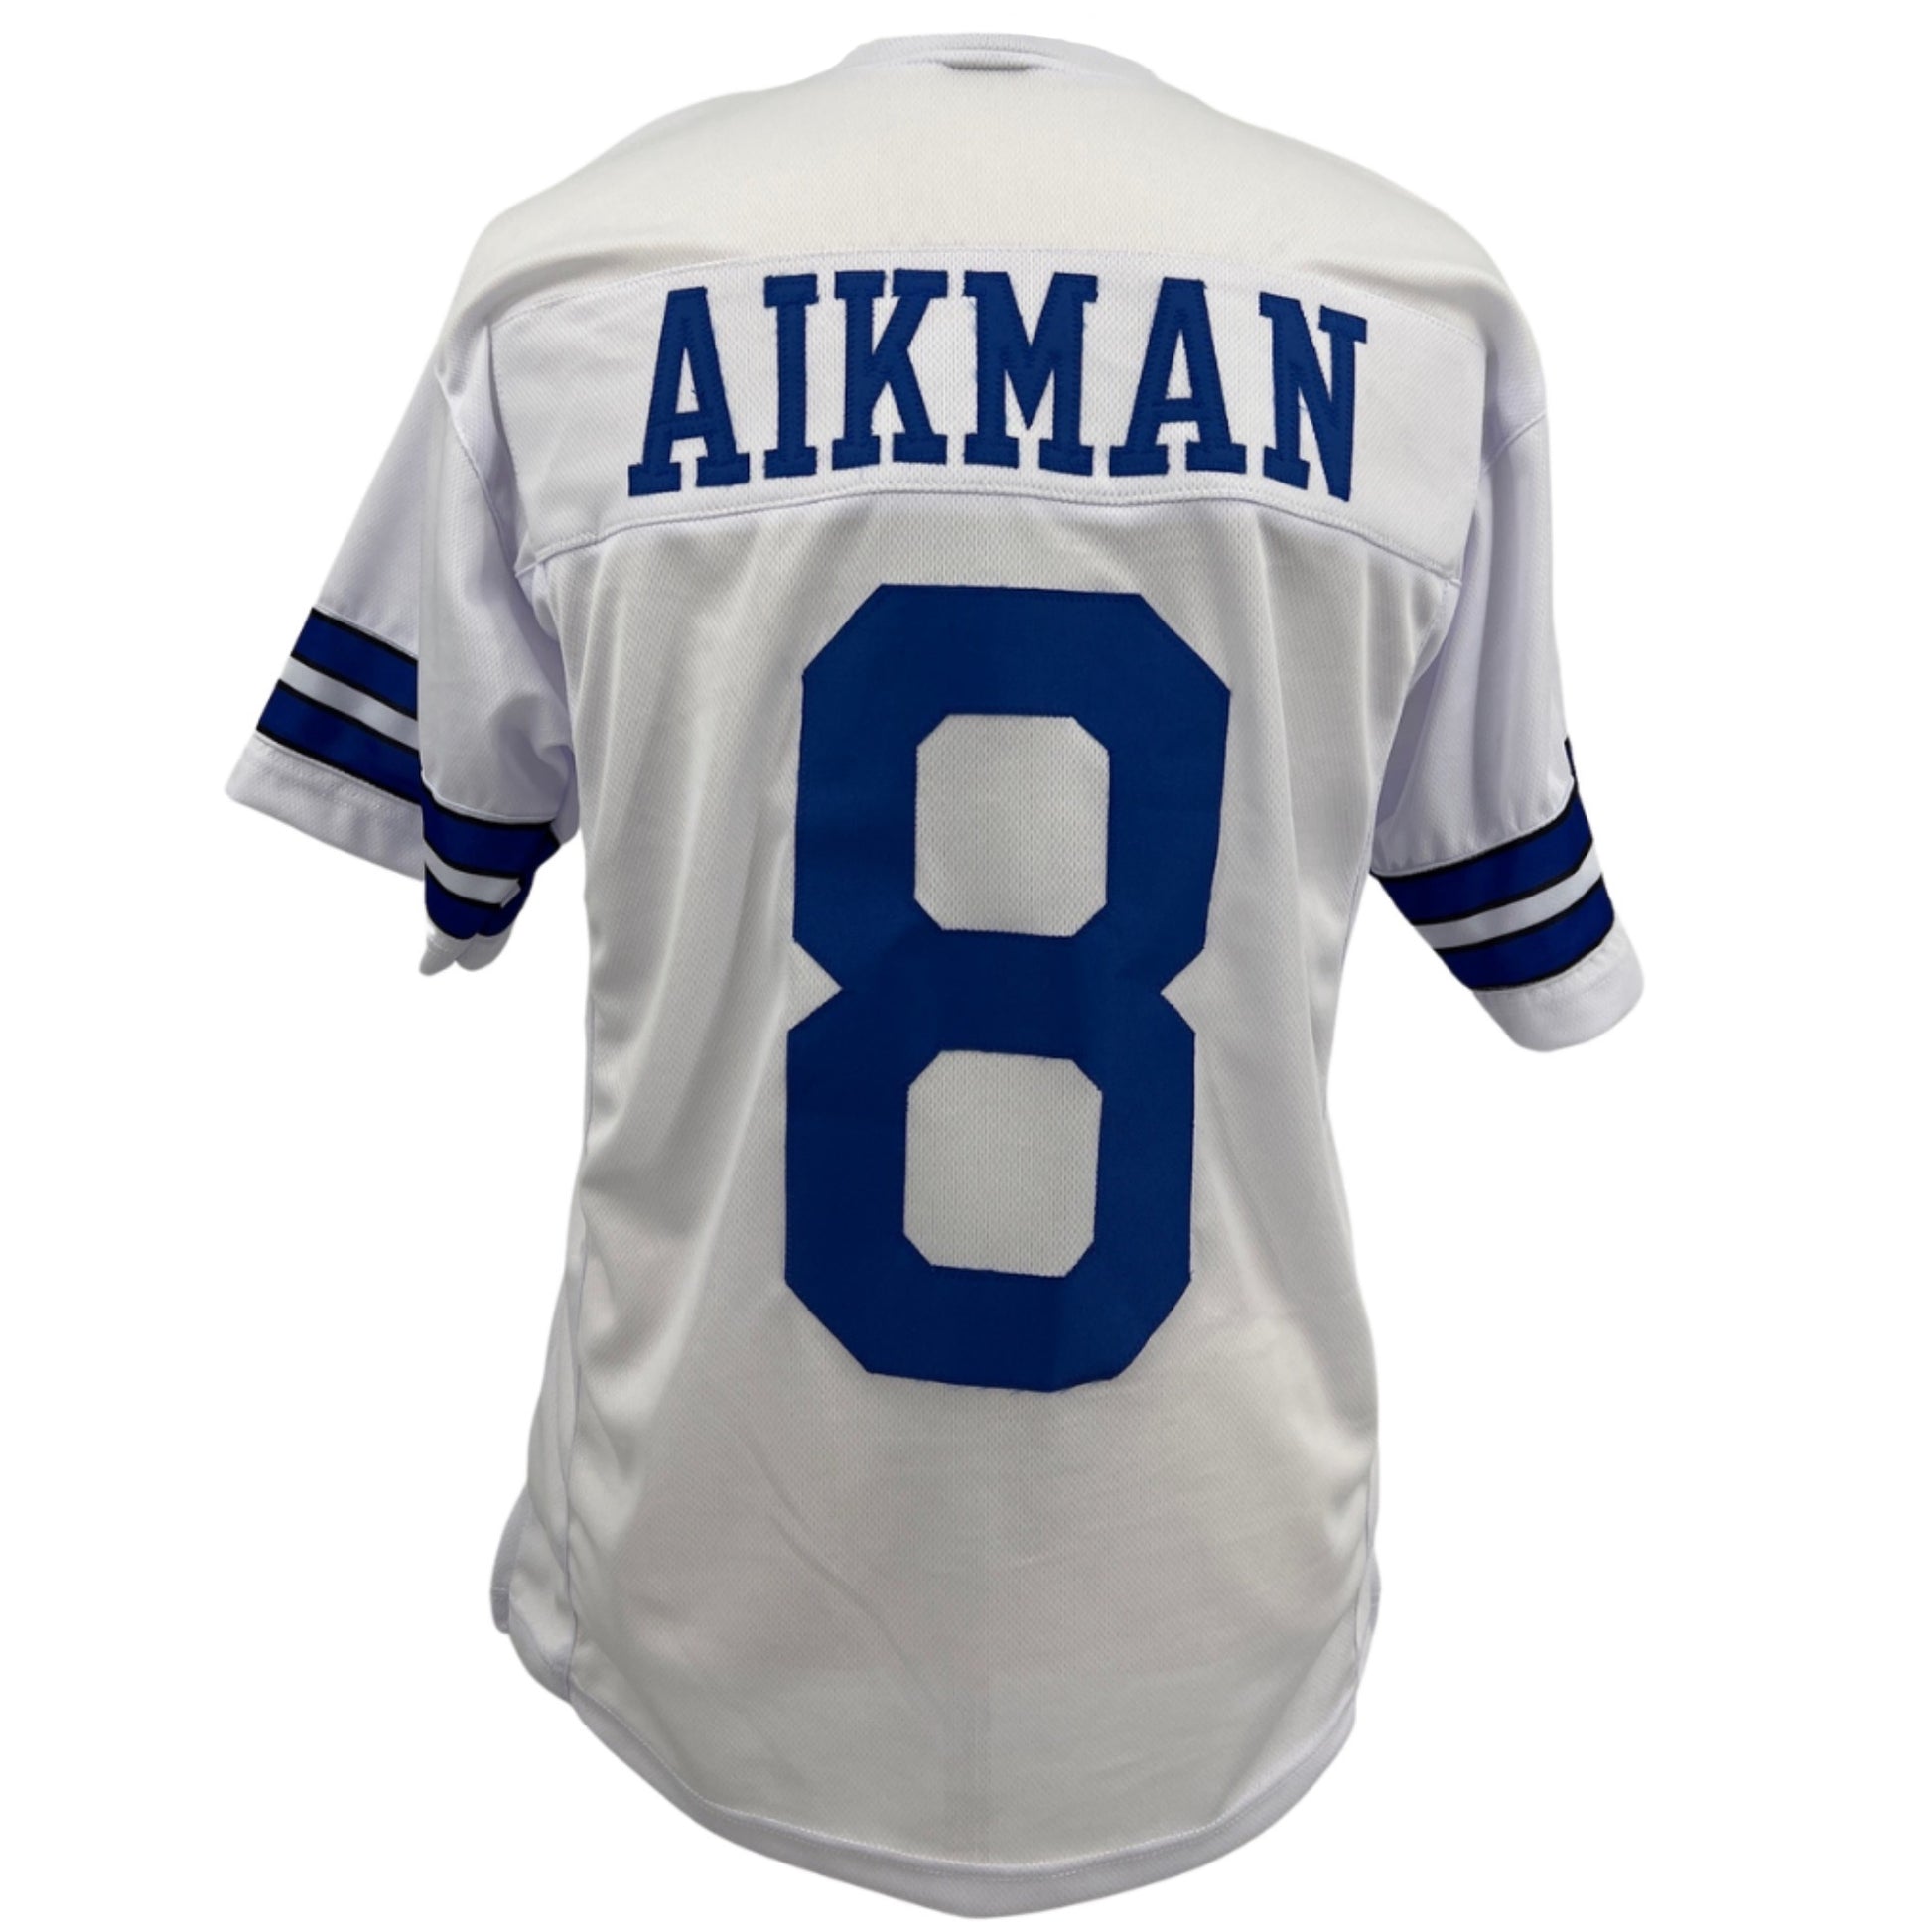 Image of Aikman Number 8 Jersey in White with Blue lettering